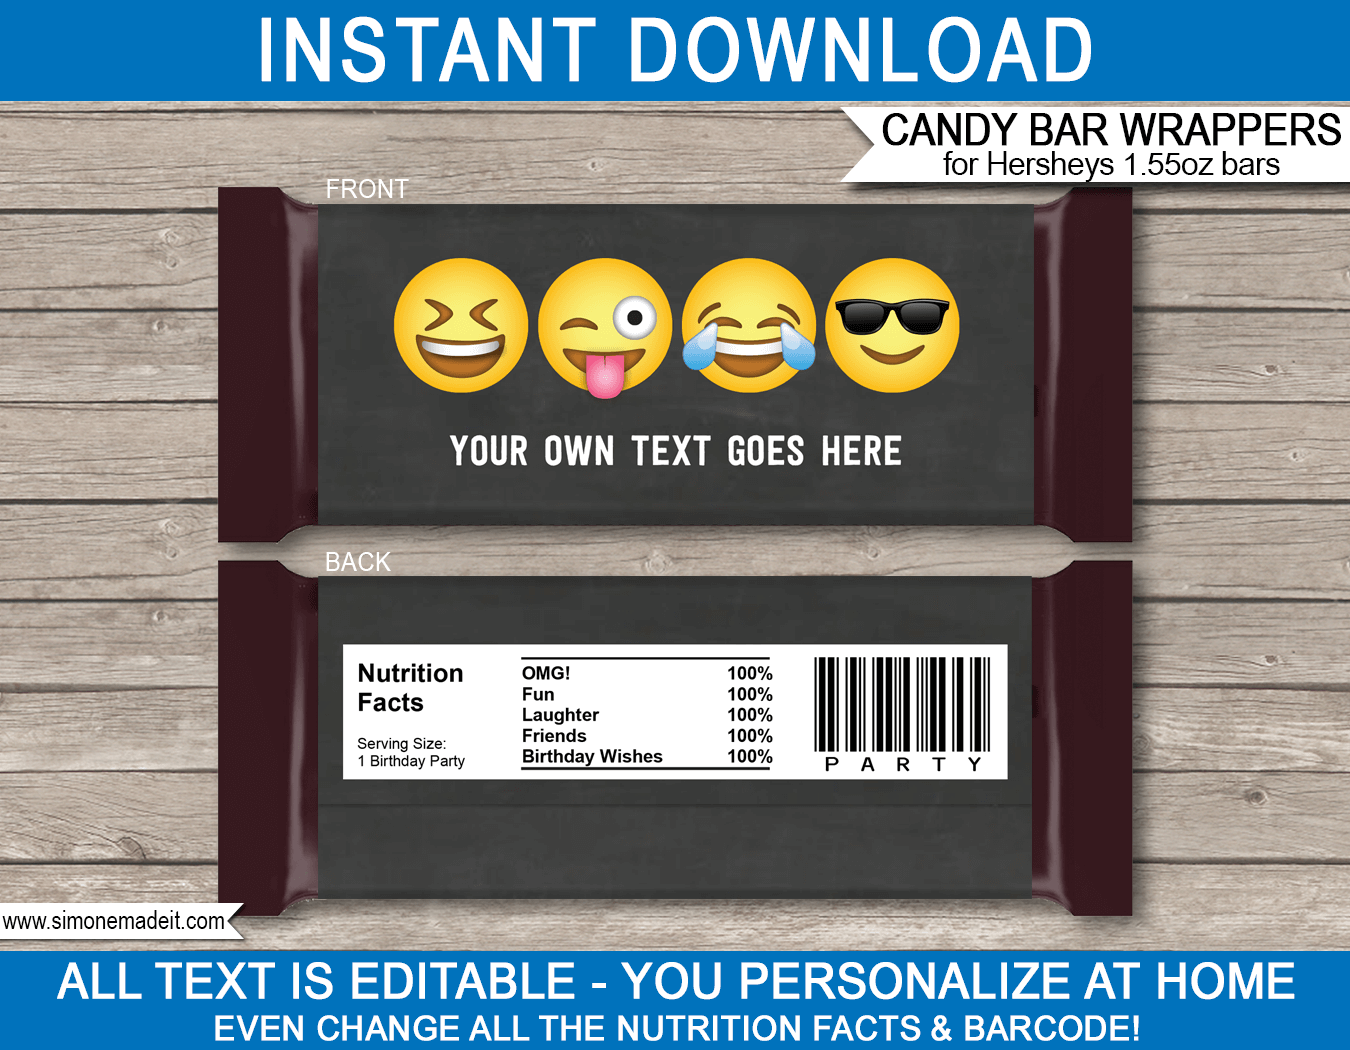 Boys Emoji Theme Candy Bar Wrappers | Birthday Party Favors | Personalized Candy Bars | Editable Template | INSTANT DOWNLOAD $3.00 via simonemadeit.com